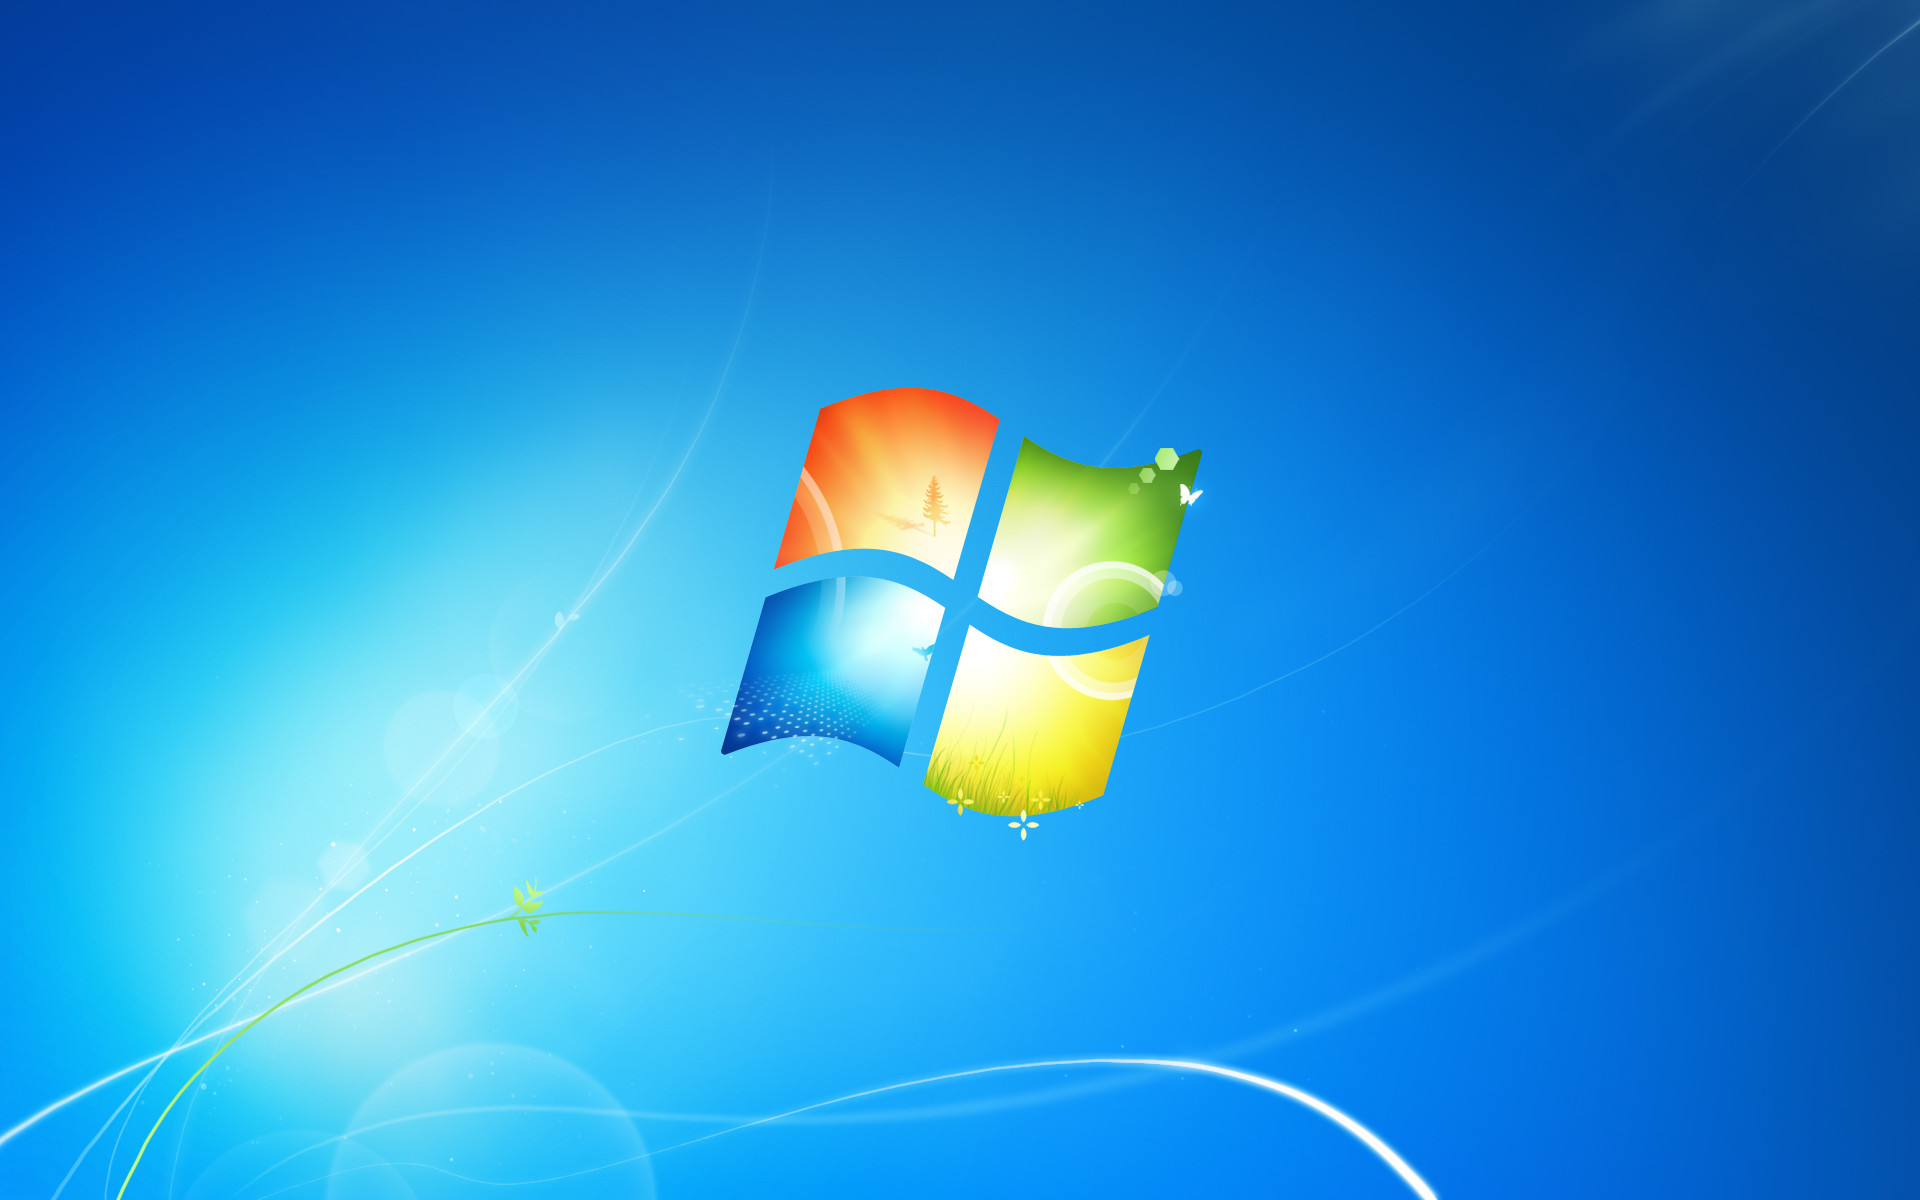 11 Newest Windows 7 ultimate wallpaper 4k with photos 